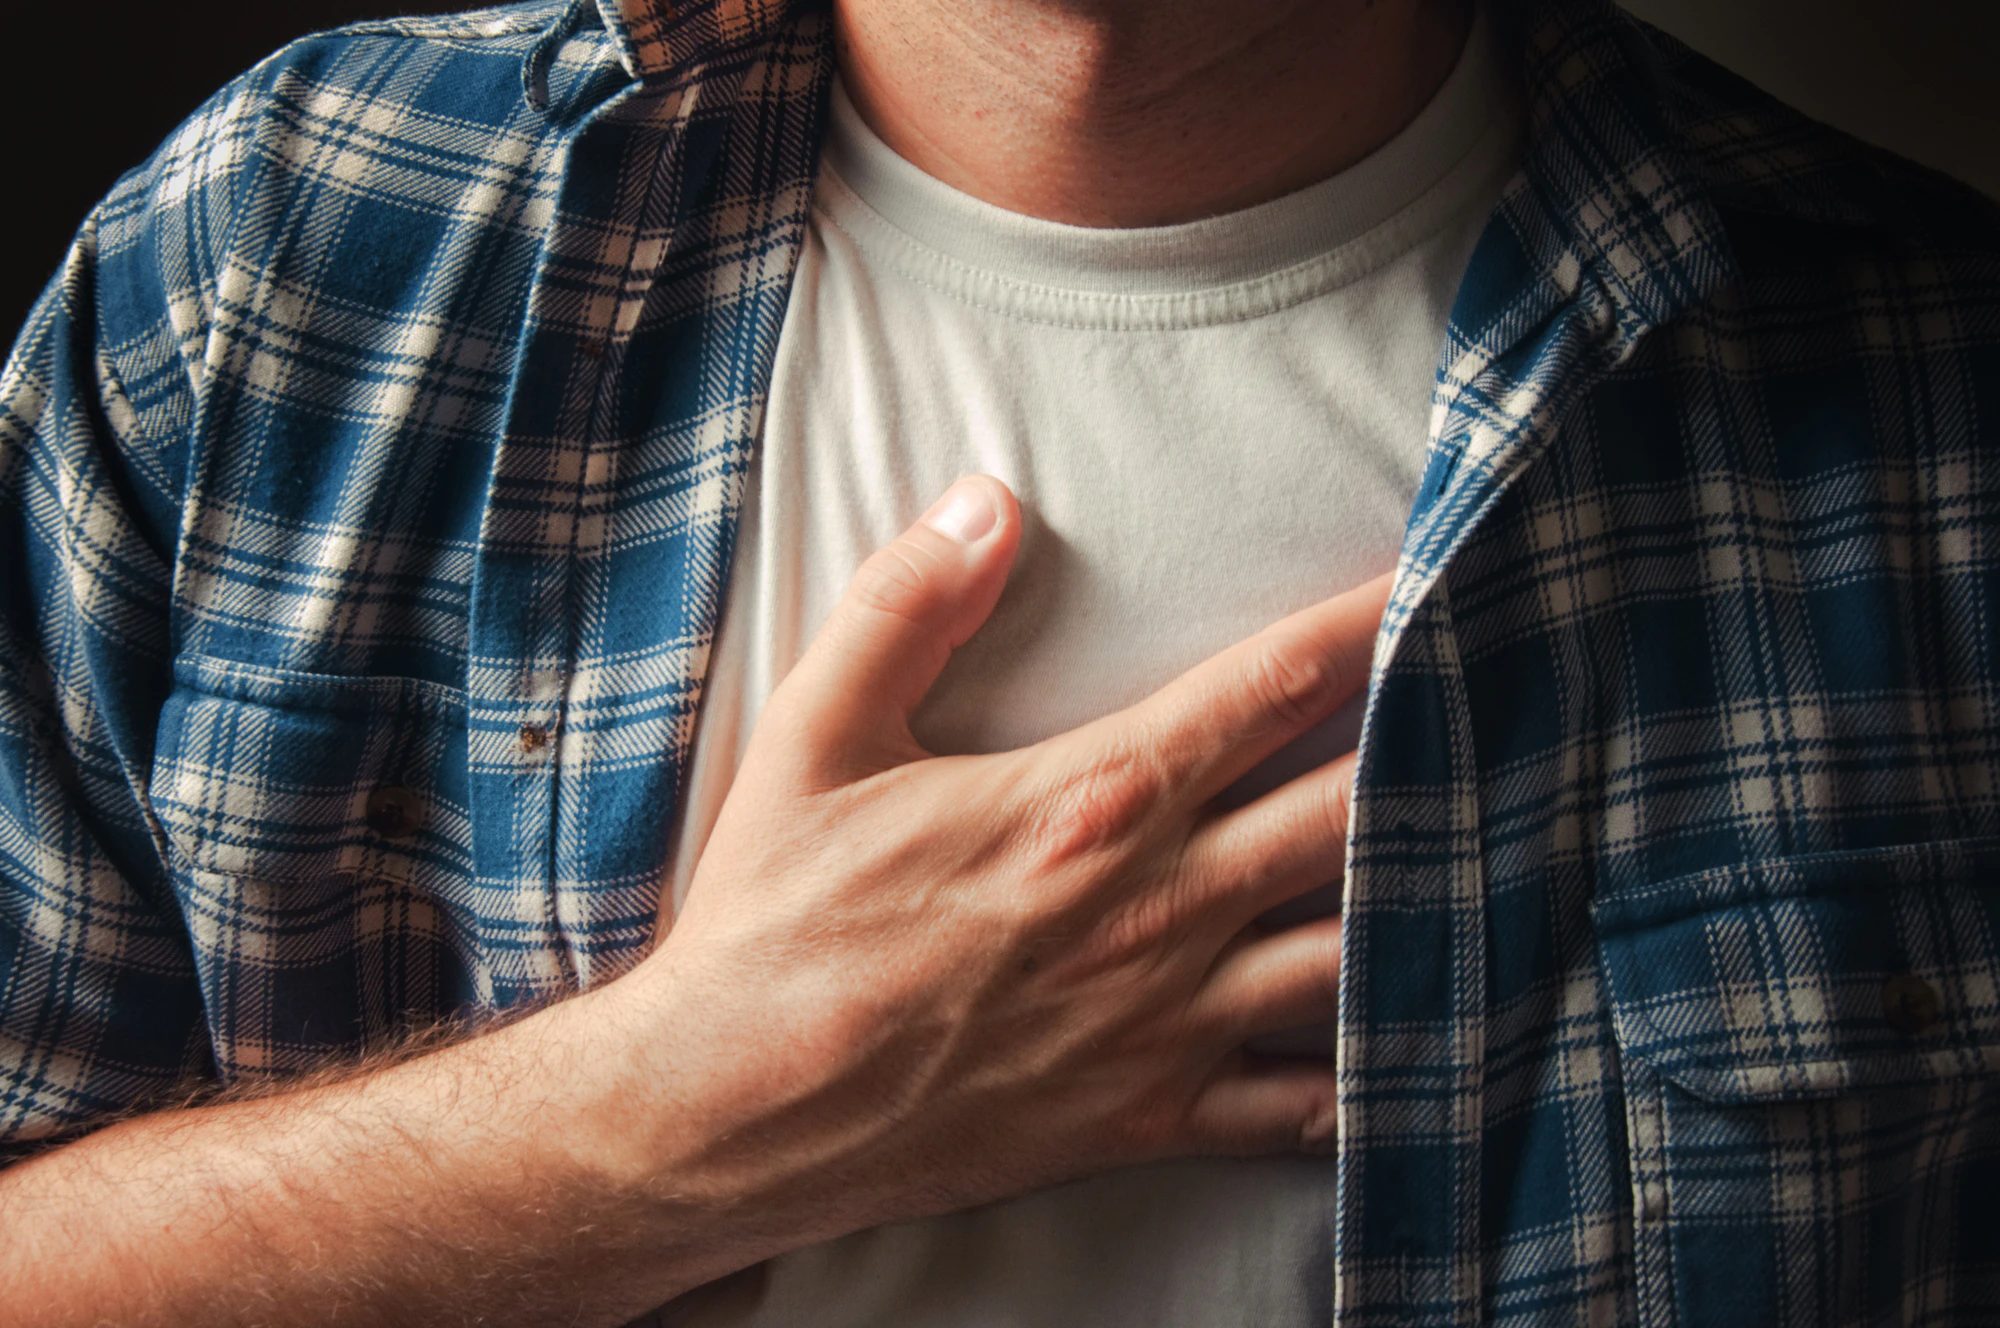 How to Get Rid of Chest Pain